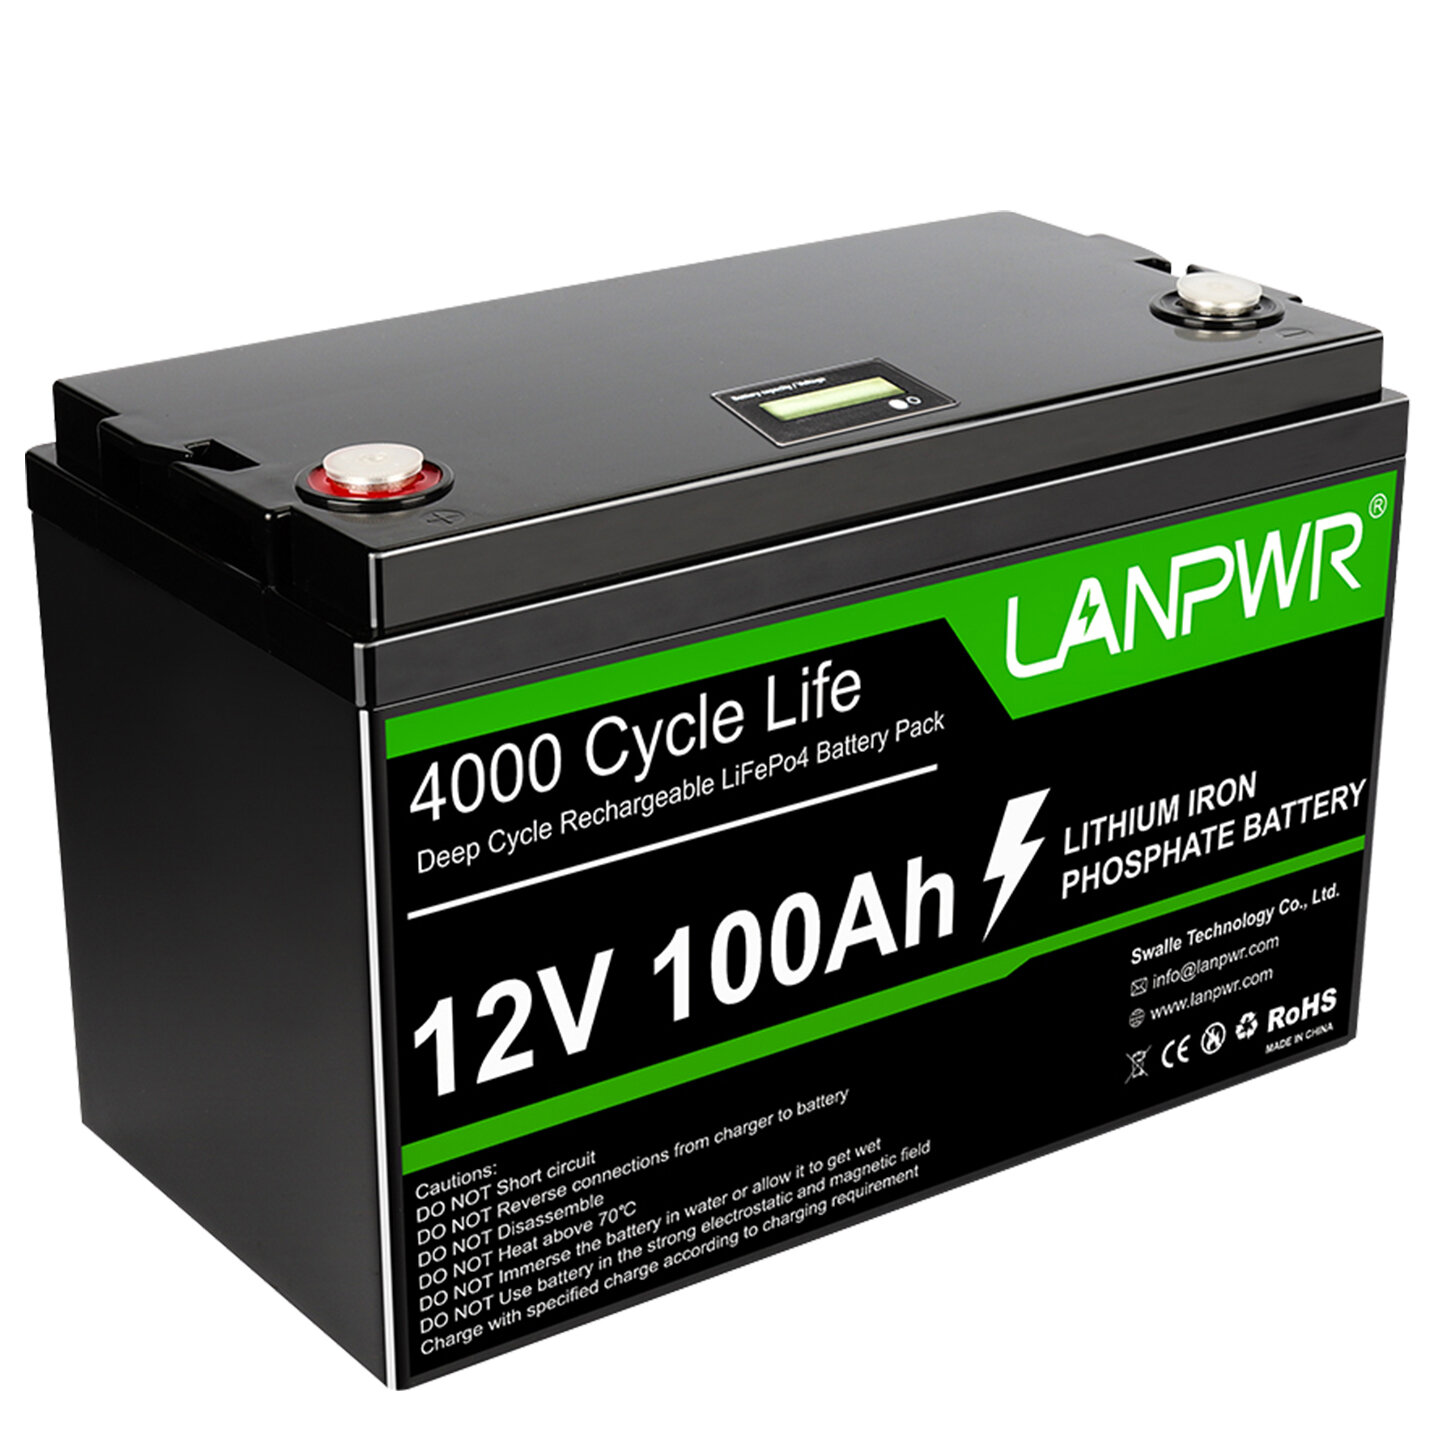 Image of [EU Direct] LANPWR 12V 100Ah 1280W LiFePO4 Lithium Battery Pack Backup Power 1280Wh Energy 4000+ Deep Cycles Built-in 10